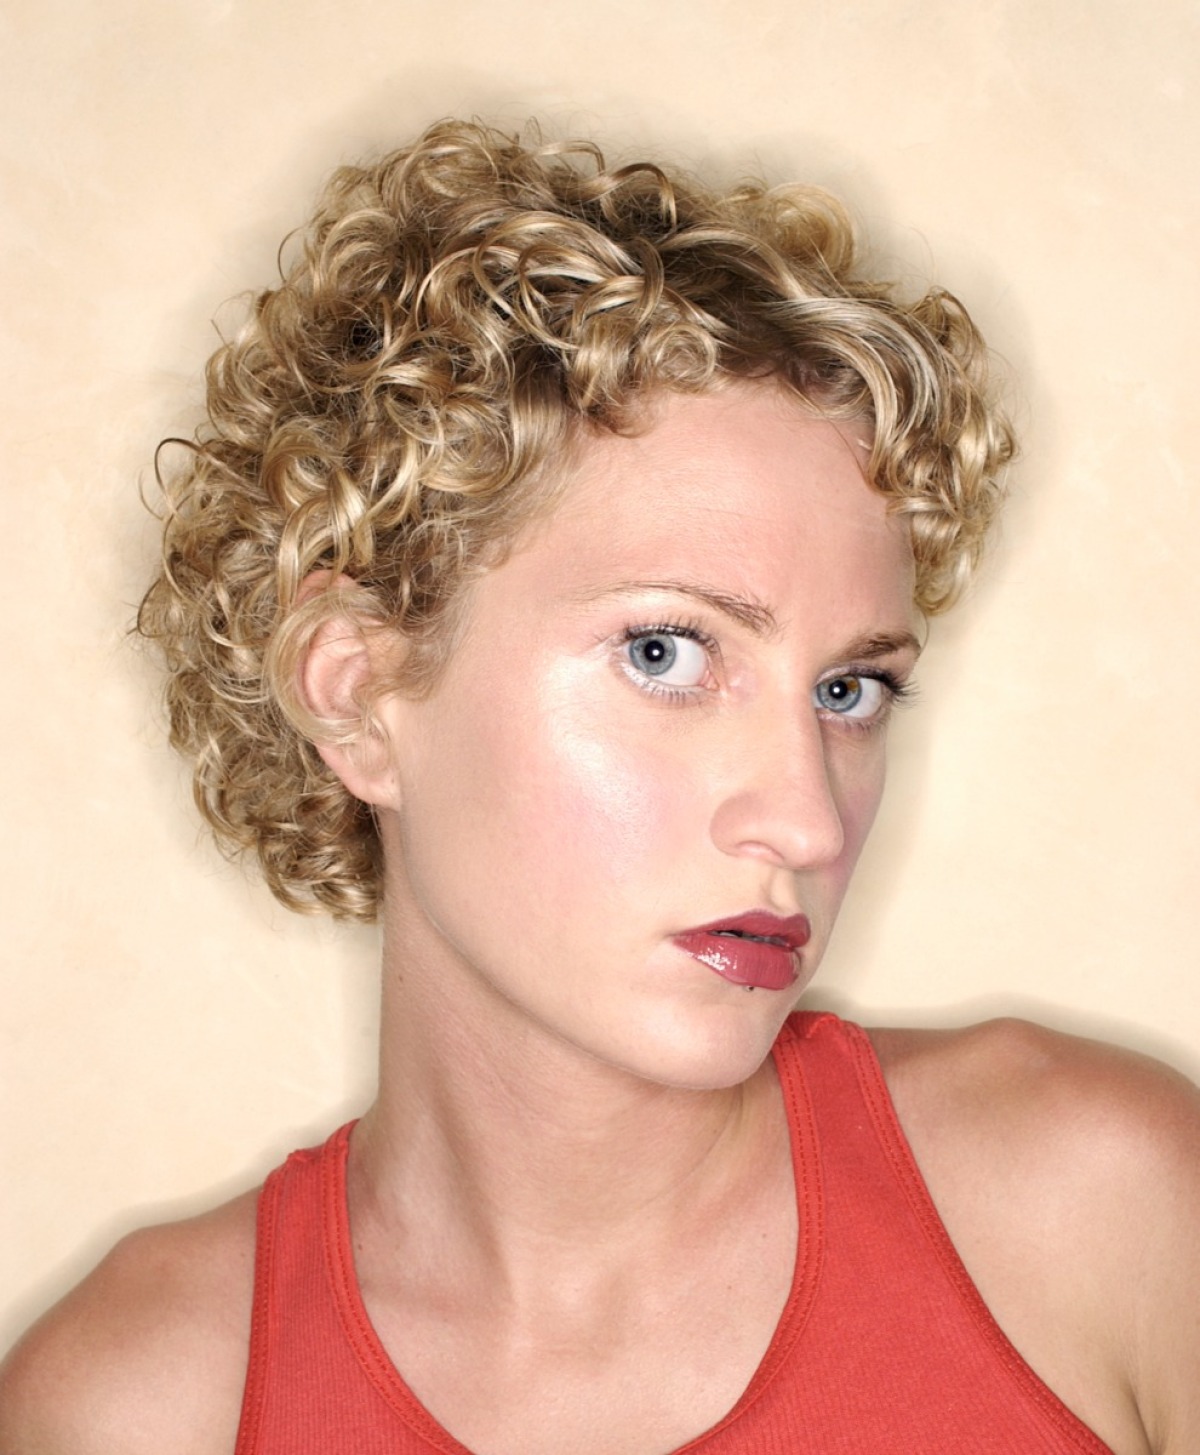 Pictures Gallery of very tight curly perm short hair.